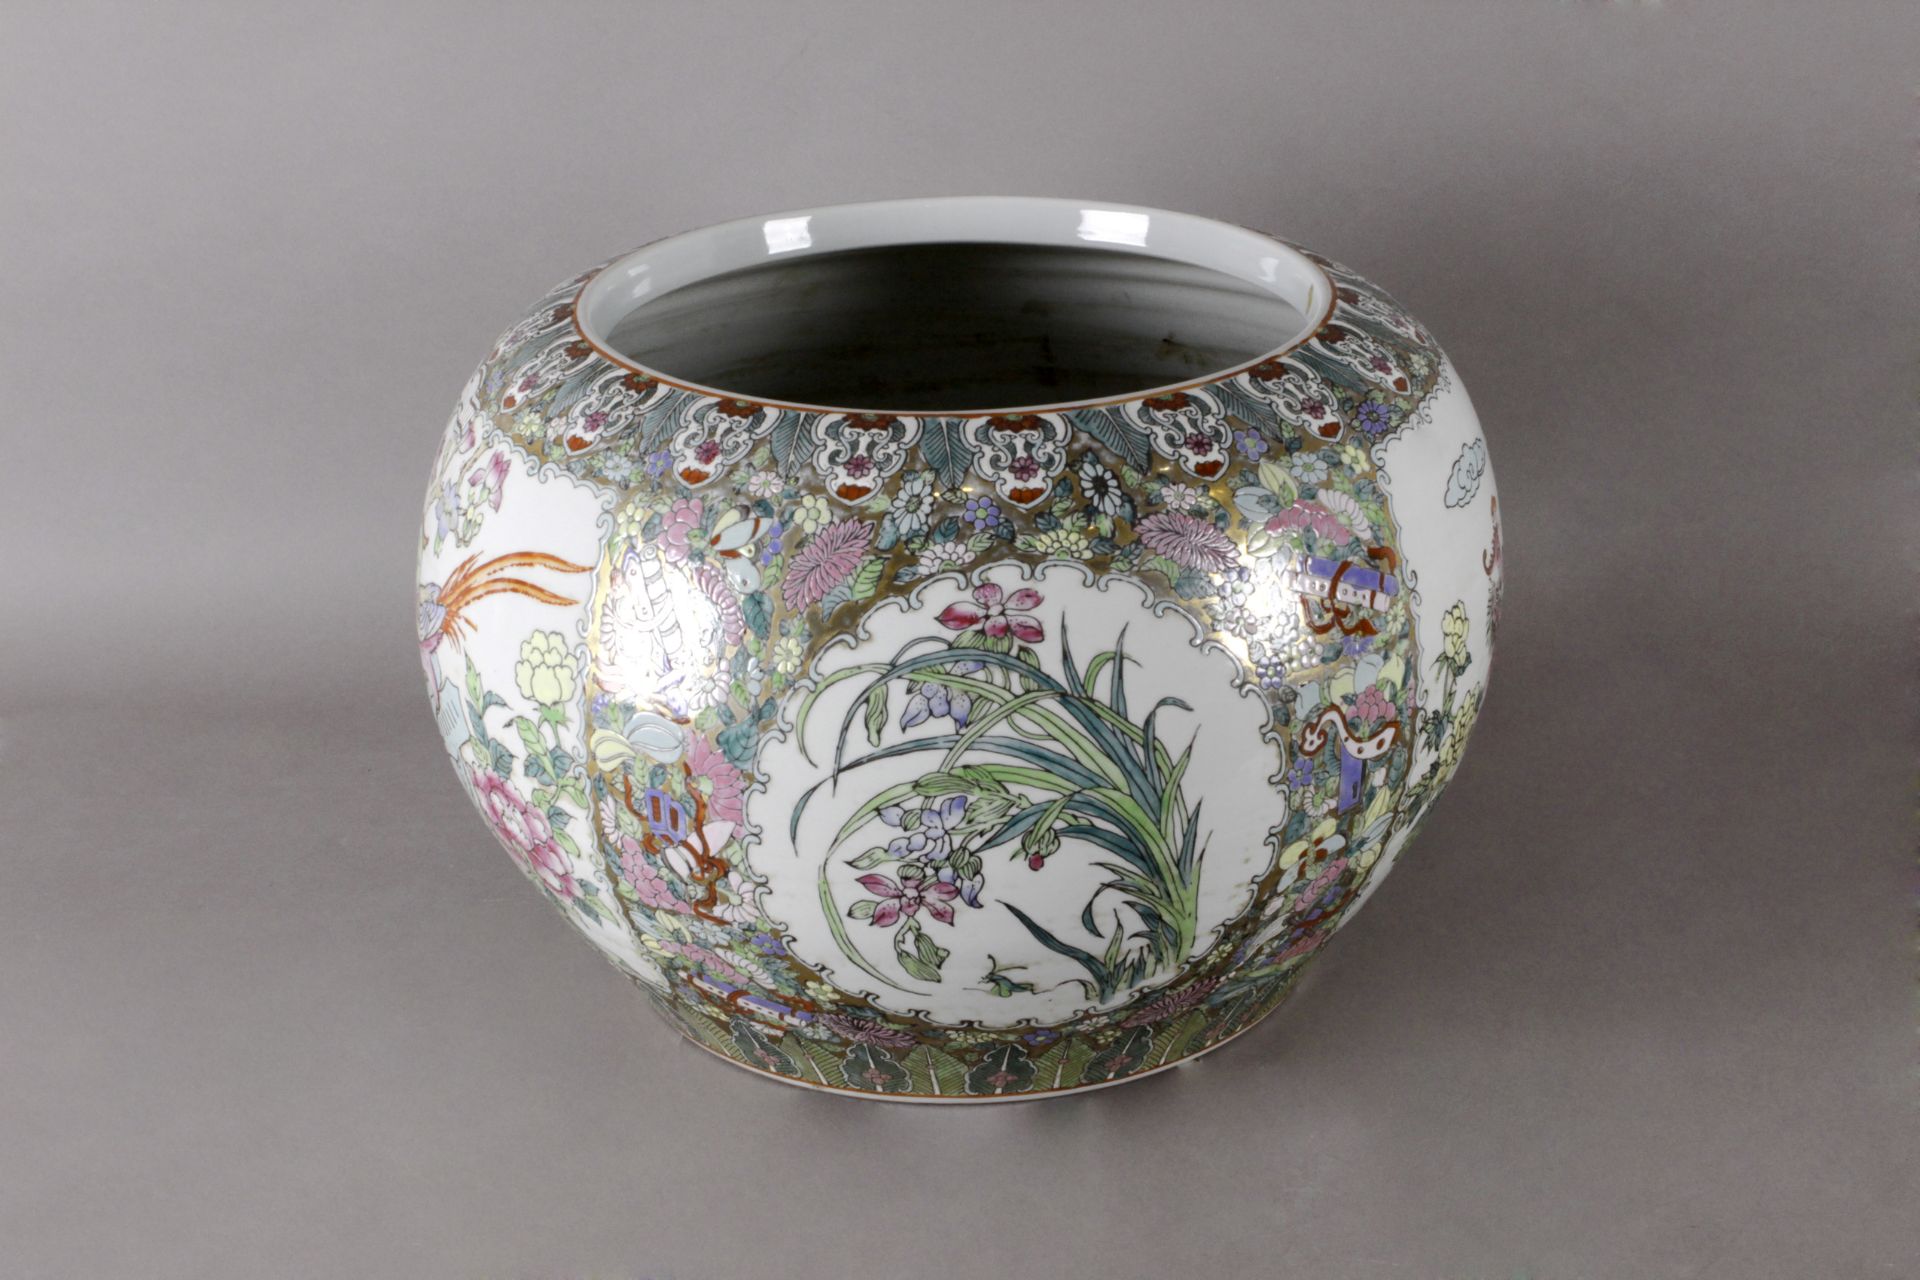 A 20th century Chinese cache pot in Famille Rose porcelain - Image 4 of 4